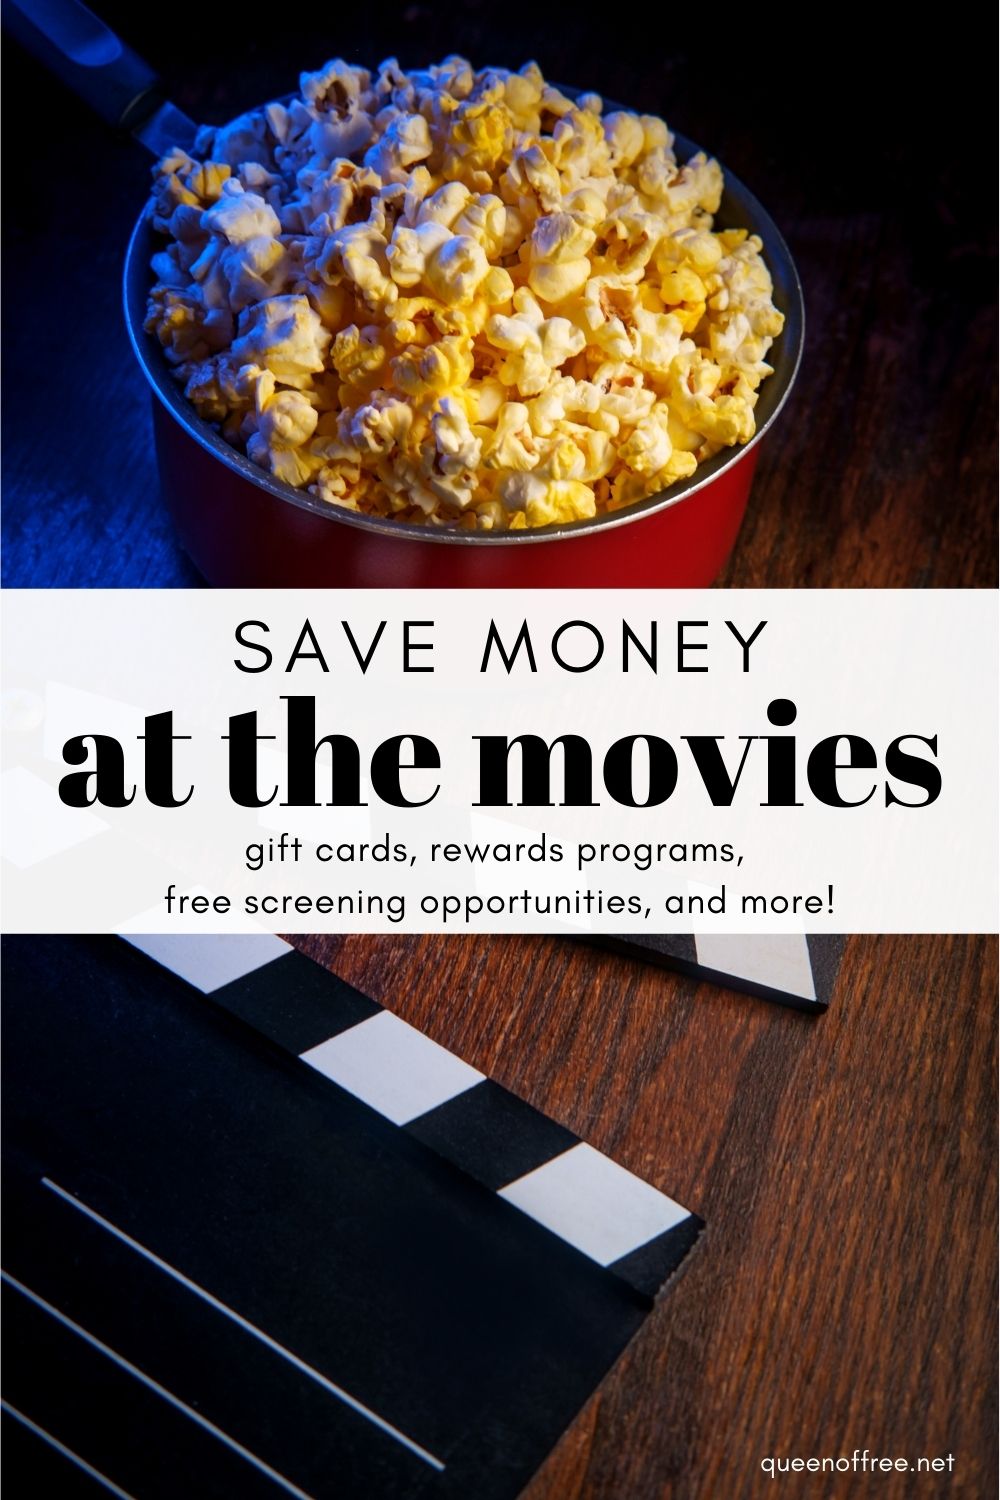 From buying gift cards under face value to free screening opportunities, you can save money at the movies with these simple strategies!